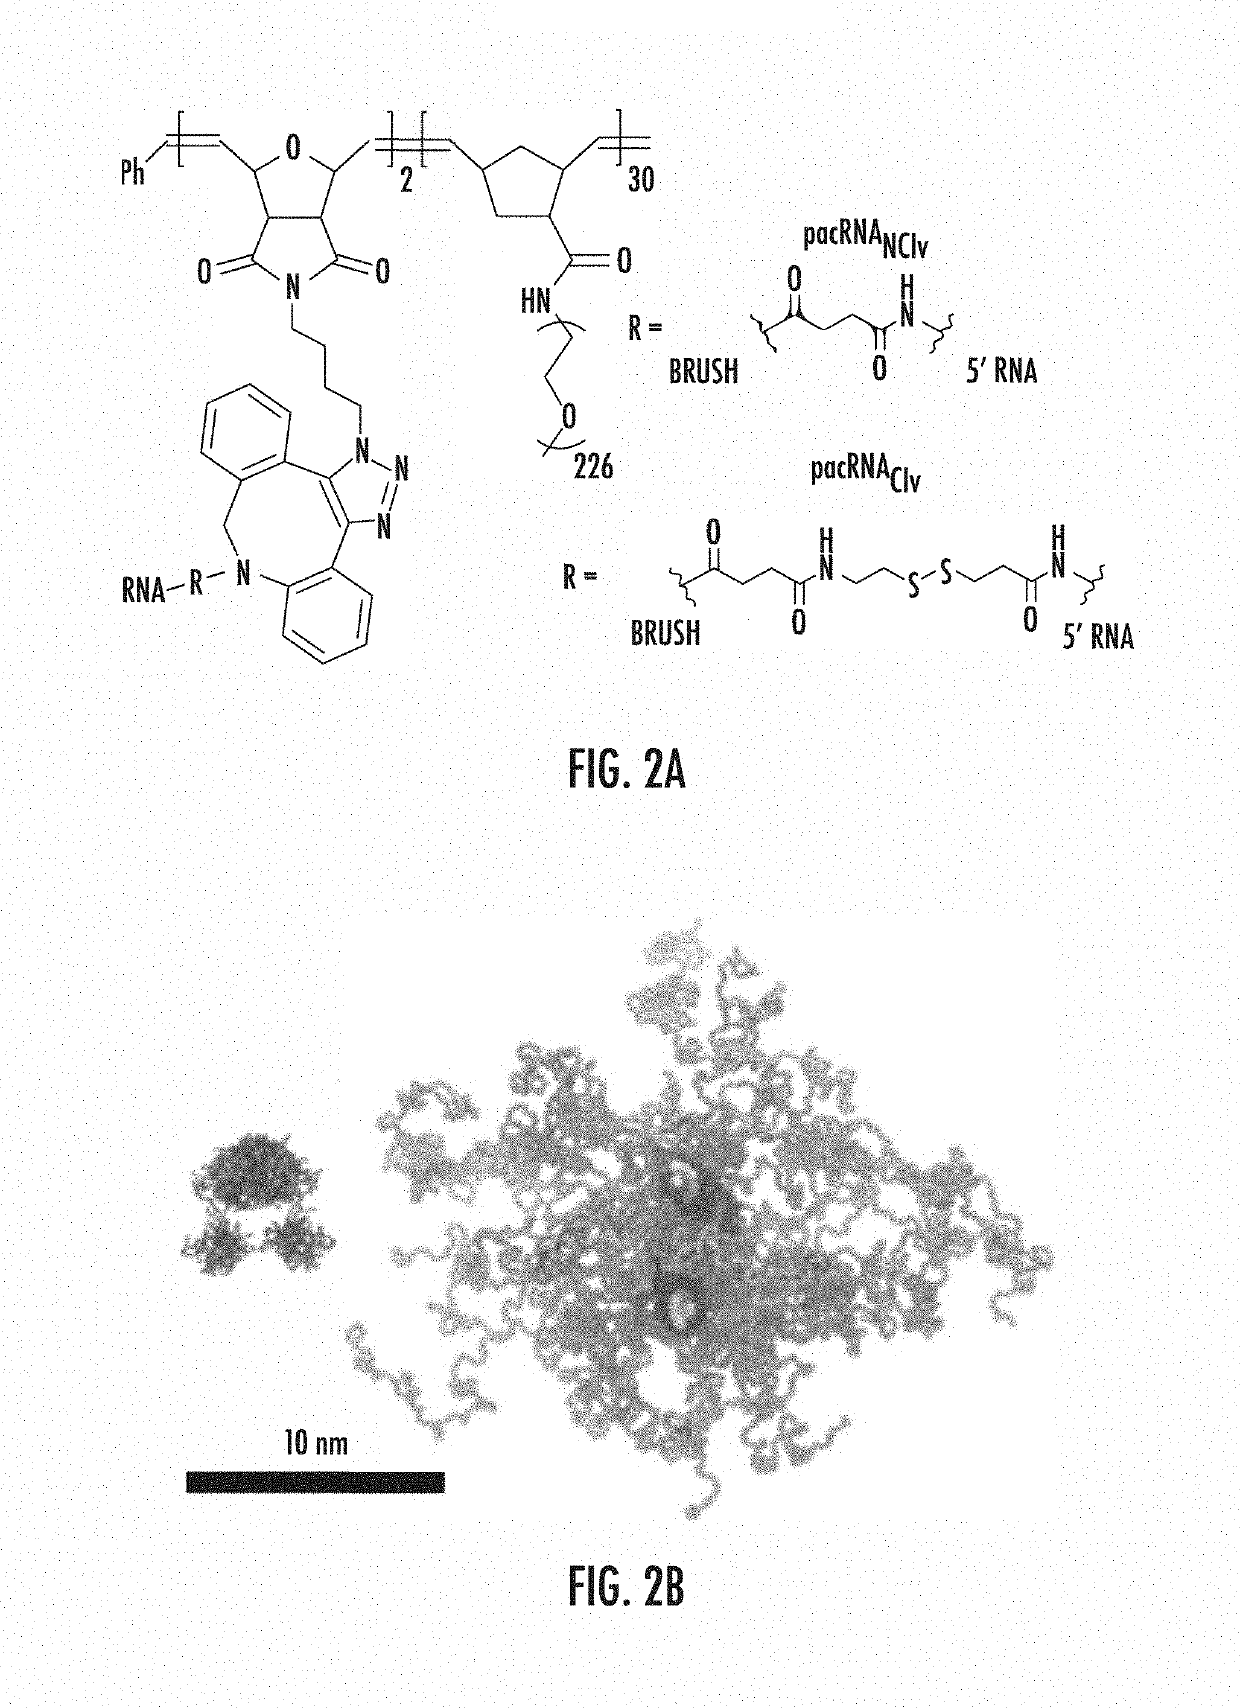 Poly(ethylene glycol) brushes for efficient RNA delivery